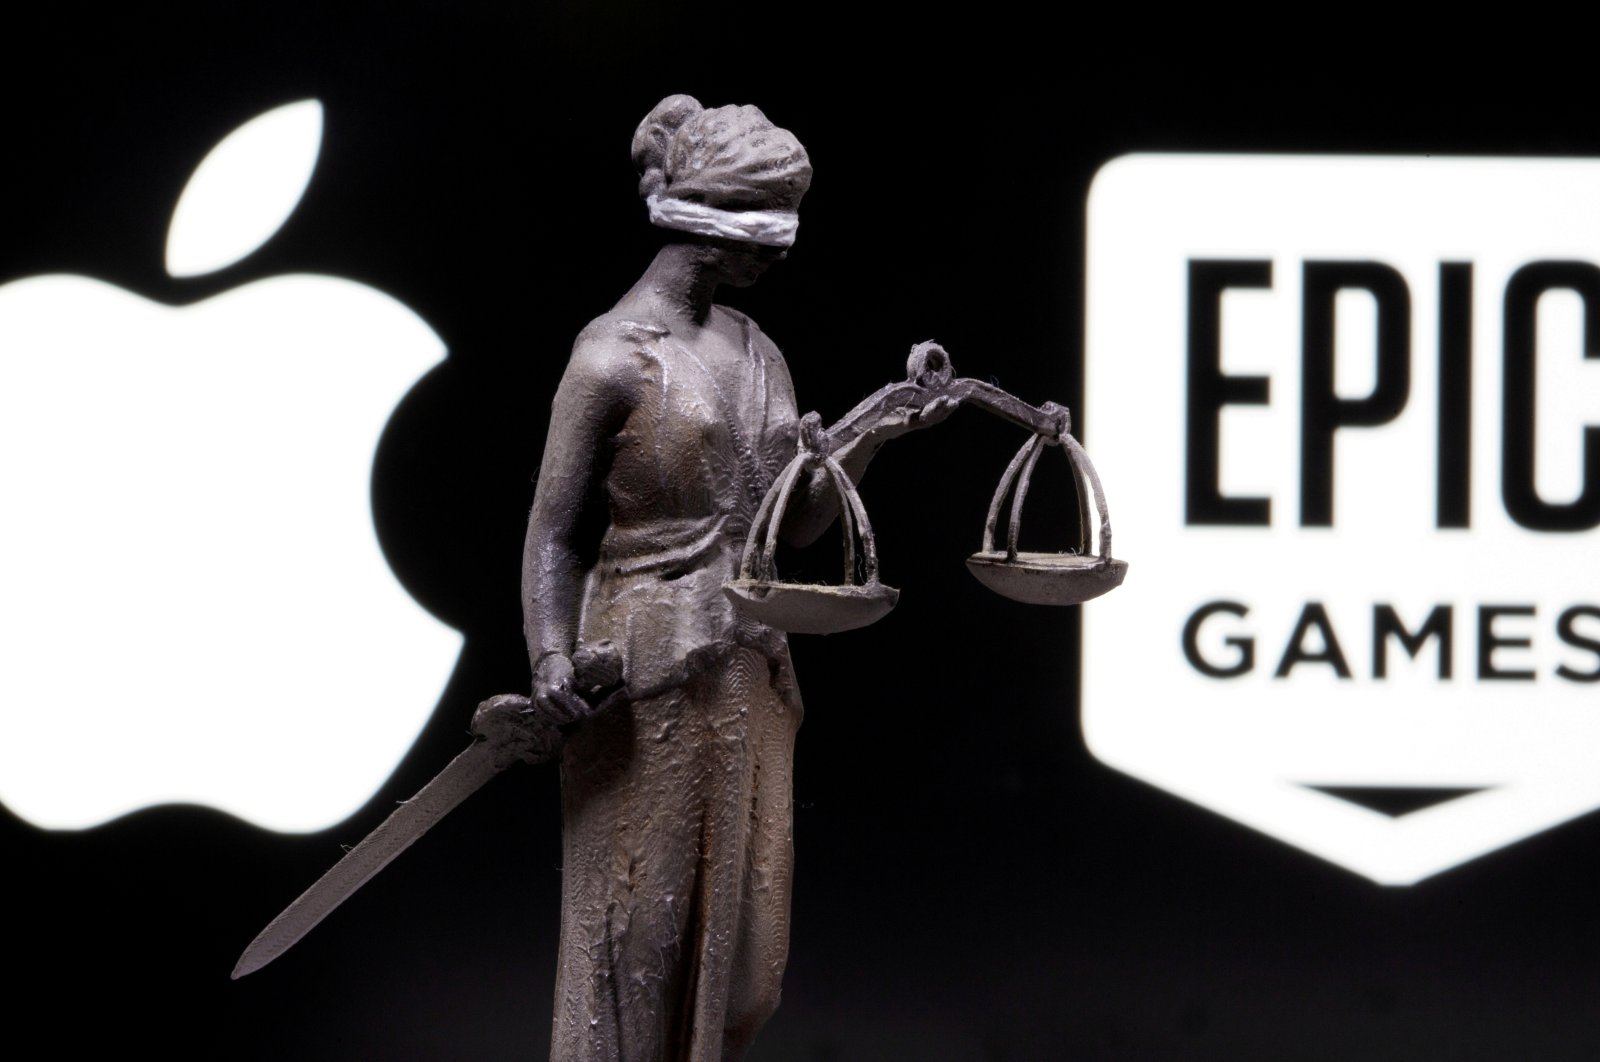 3D printed Lady Justice figure is seen in front of displayed Apple and Epic Games logos in this illustration photo taken Feb. 17, 2021. (Reuters Photo)